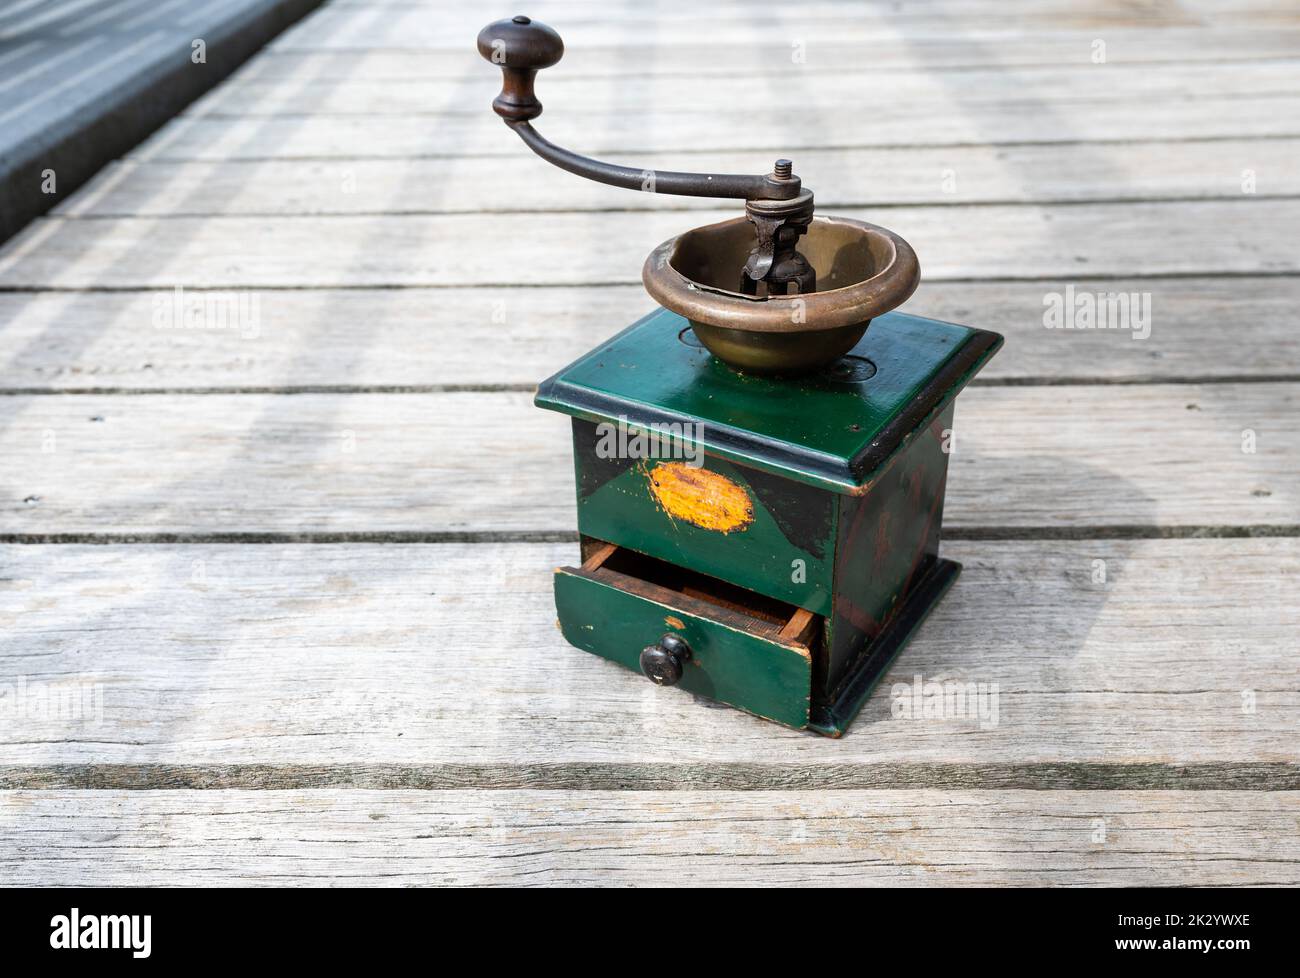 Jette, Brussels, Belgium, 09 20 2022 - Isolated vintage coffee grinder Stock Photo